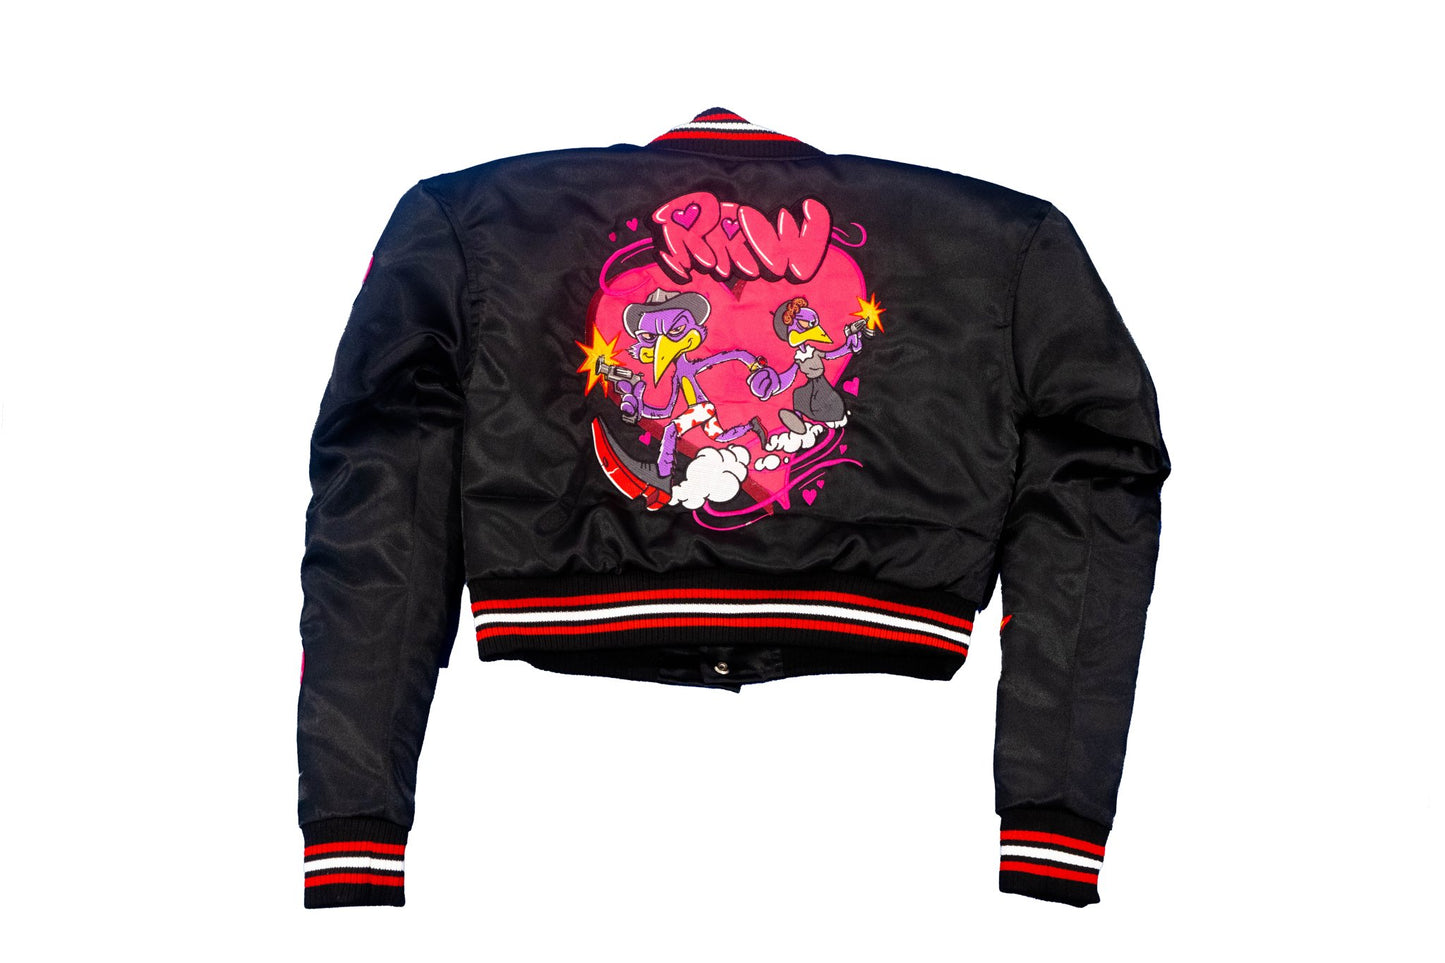 Bonnie & Clyde Cropped Bomber Jacket (Women’s) - Road Runners World Global